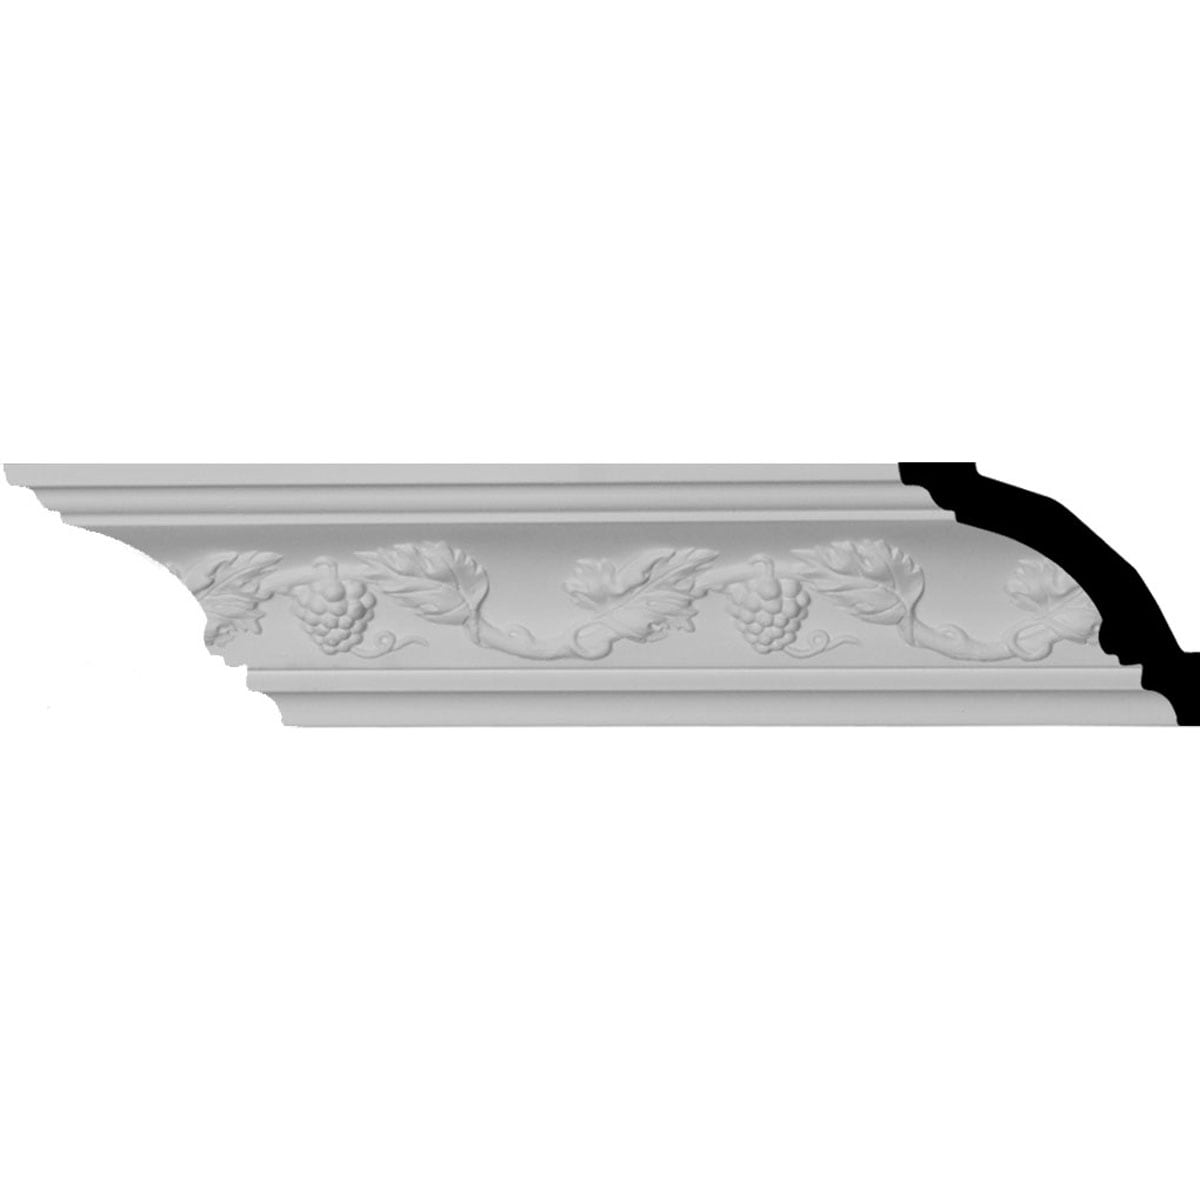 Grapevine 2-3/4-in x 7-ft 10-1/2-in Primed Polyurethane Crown Moulding (12-Pack) in Off-White | - Ekena Millwork 686611